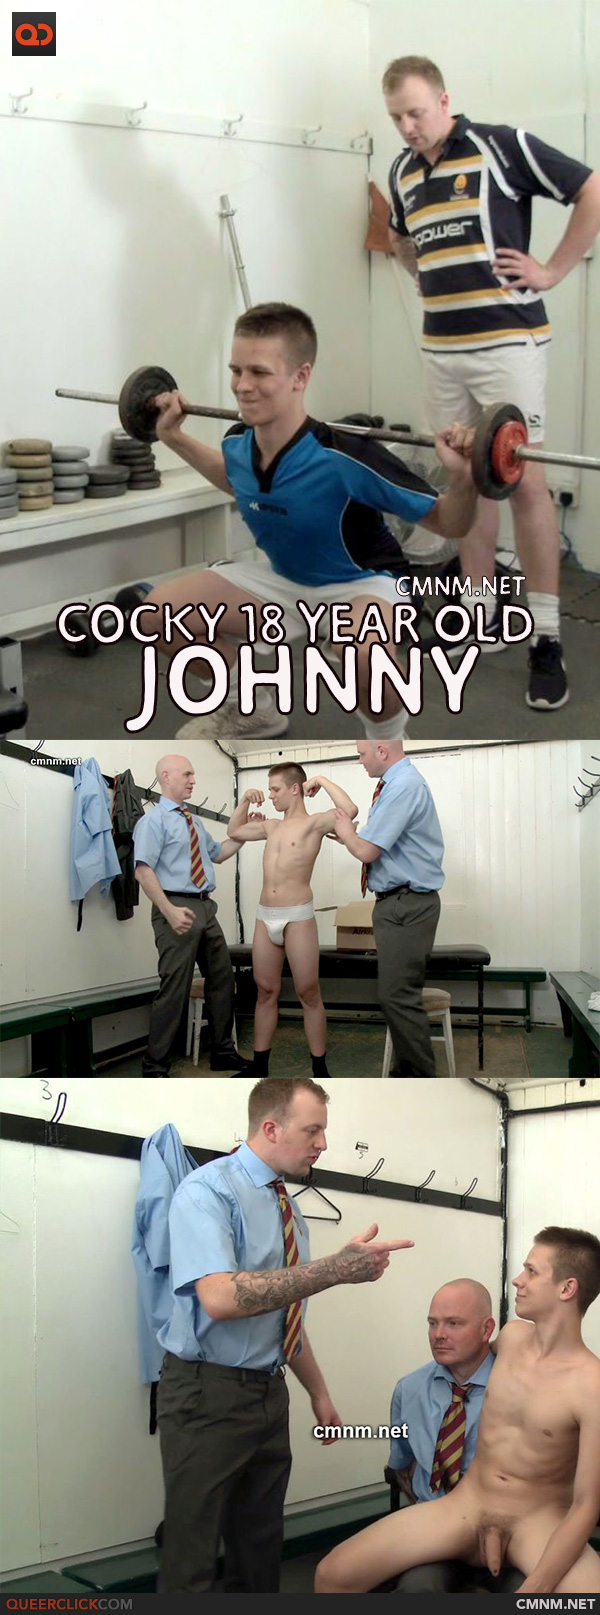 CMNM.net: Cocky 18 Year Old Johnny